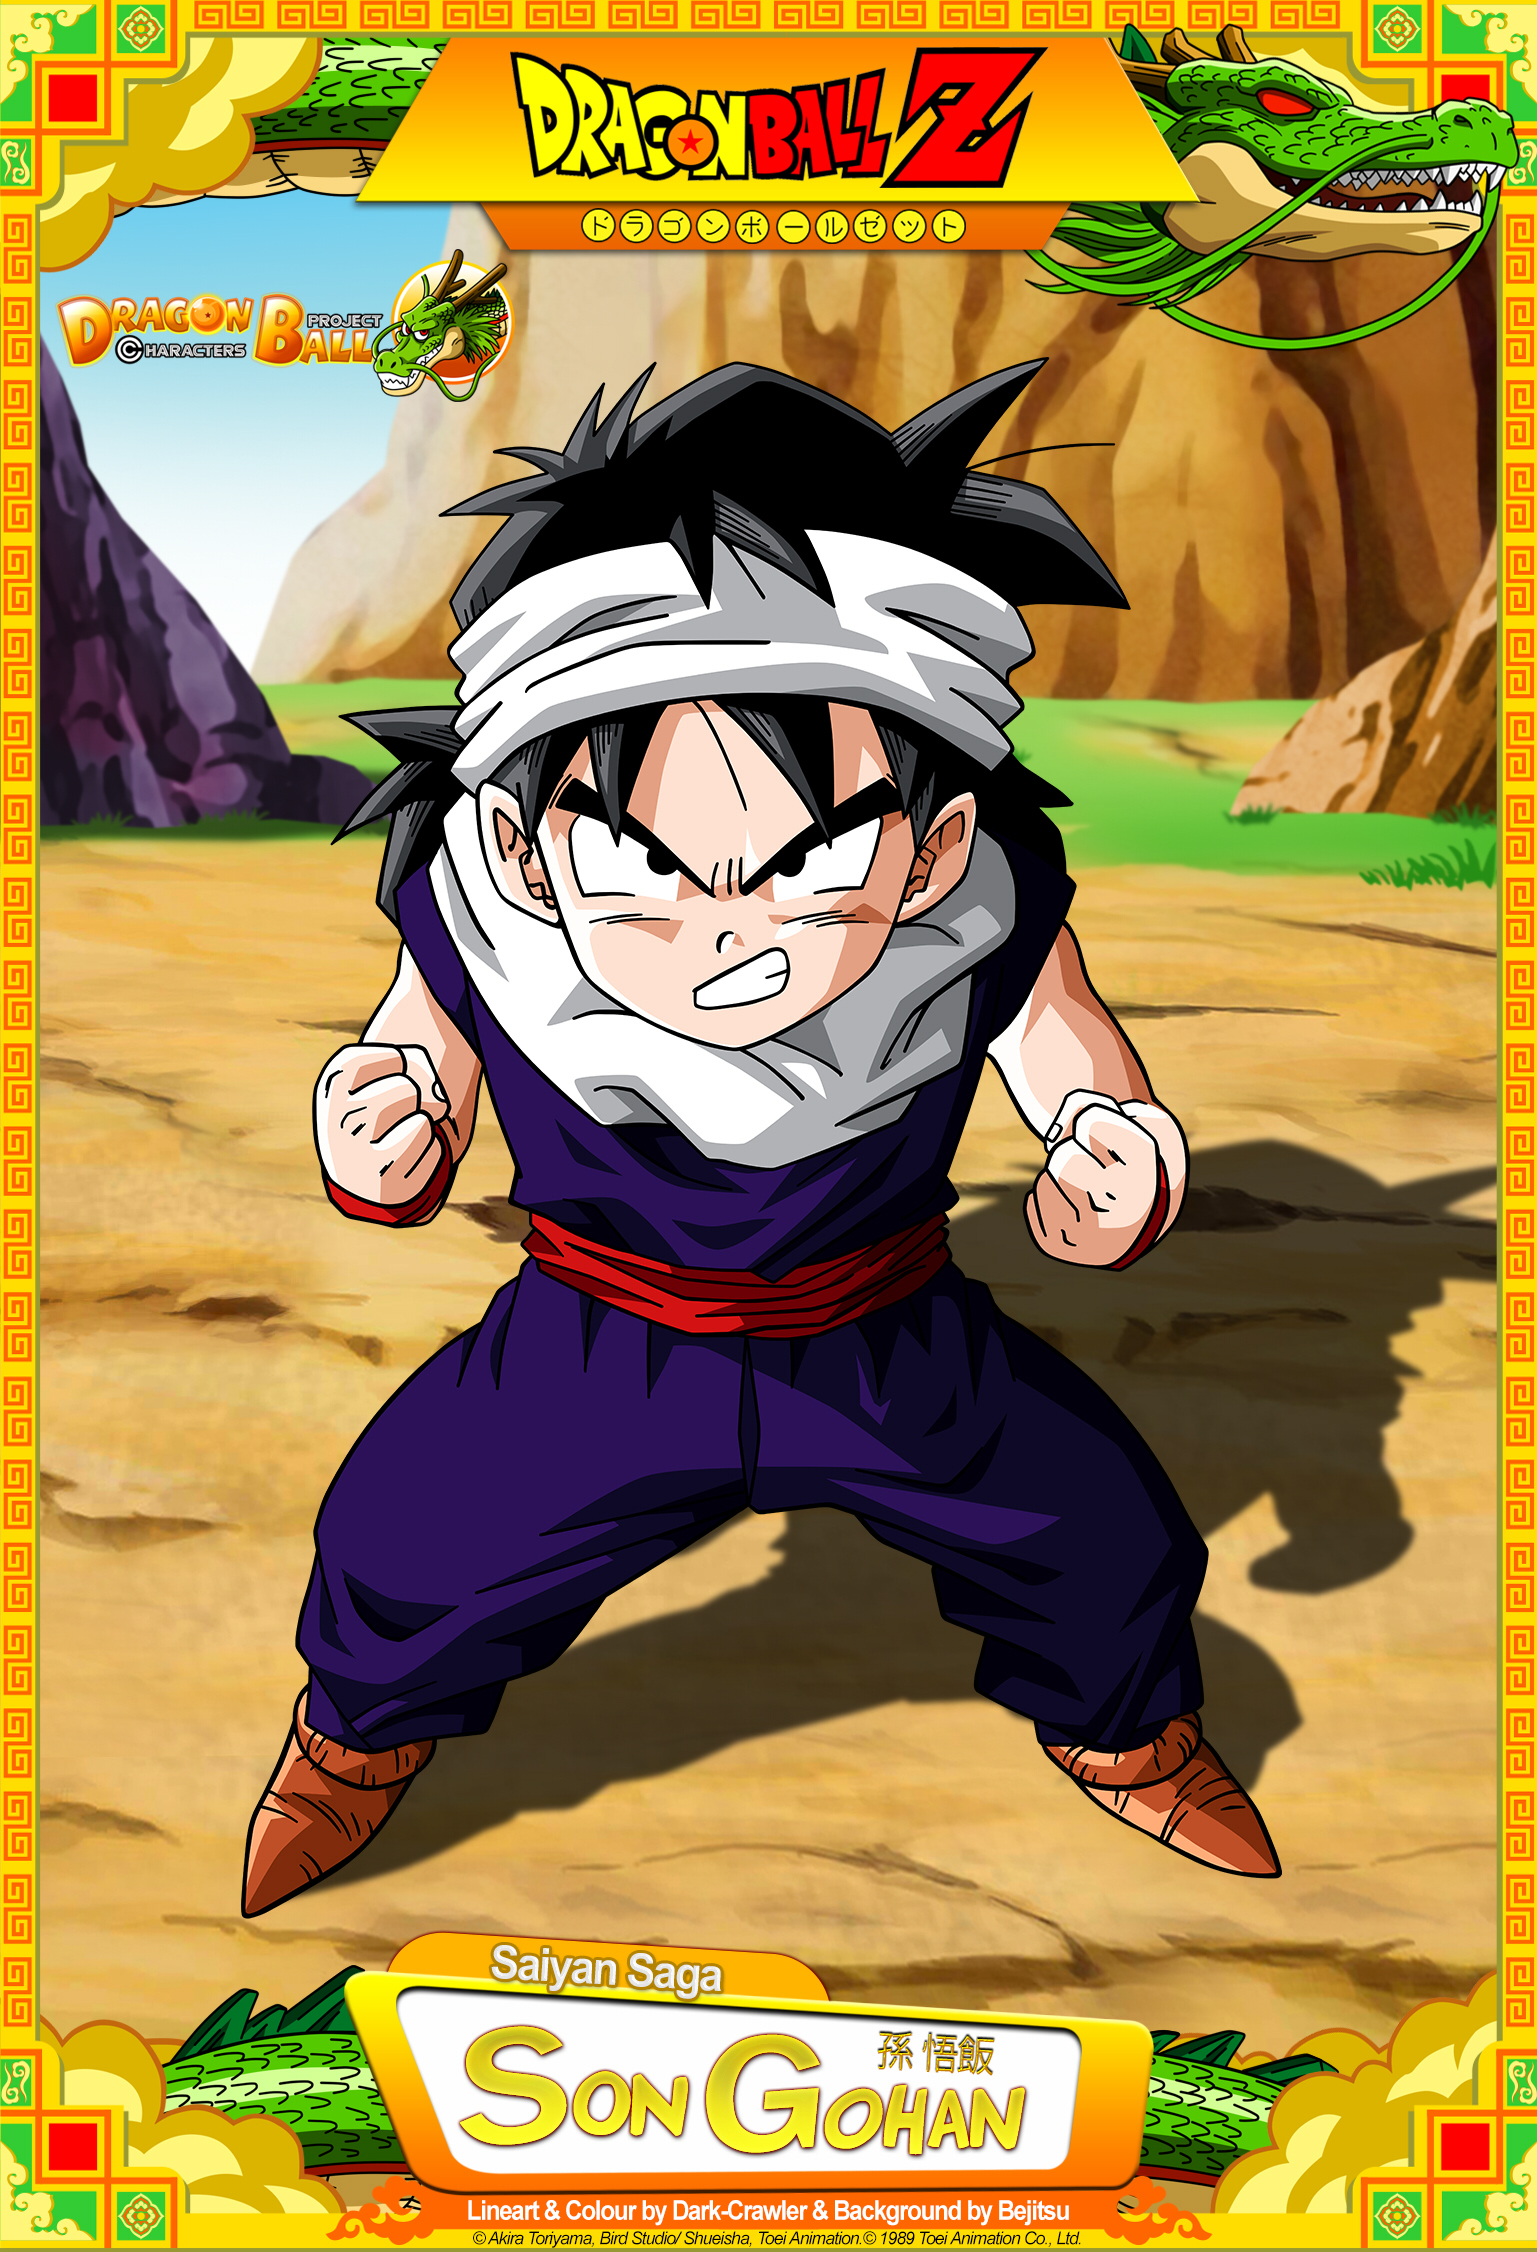 Dragon Ball Z - Son Gohan by DBCProject on DeviantArt